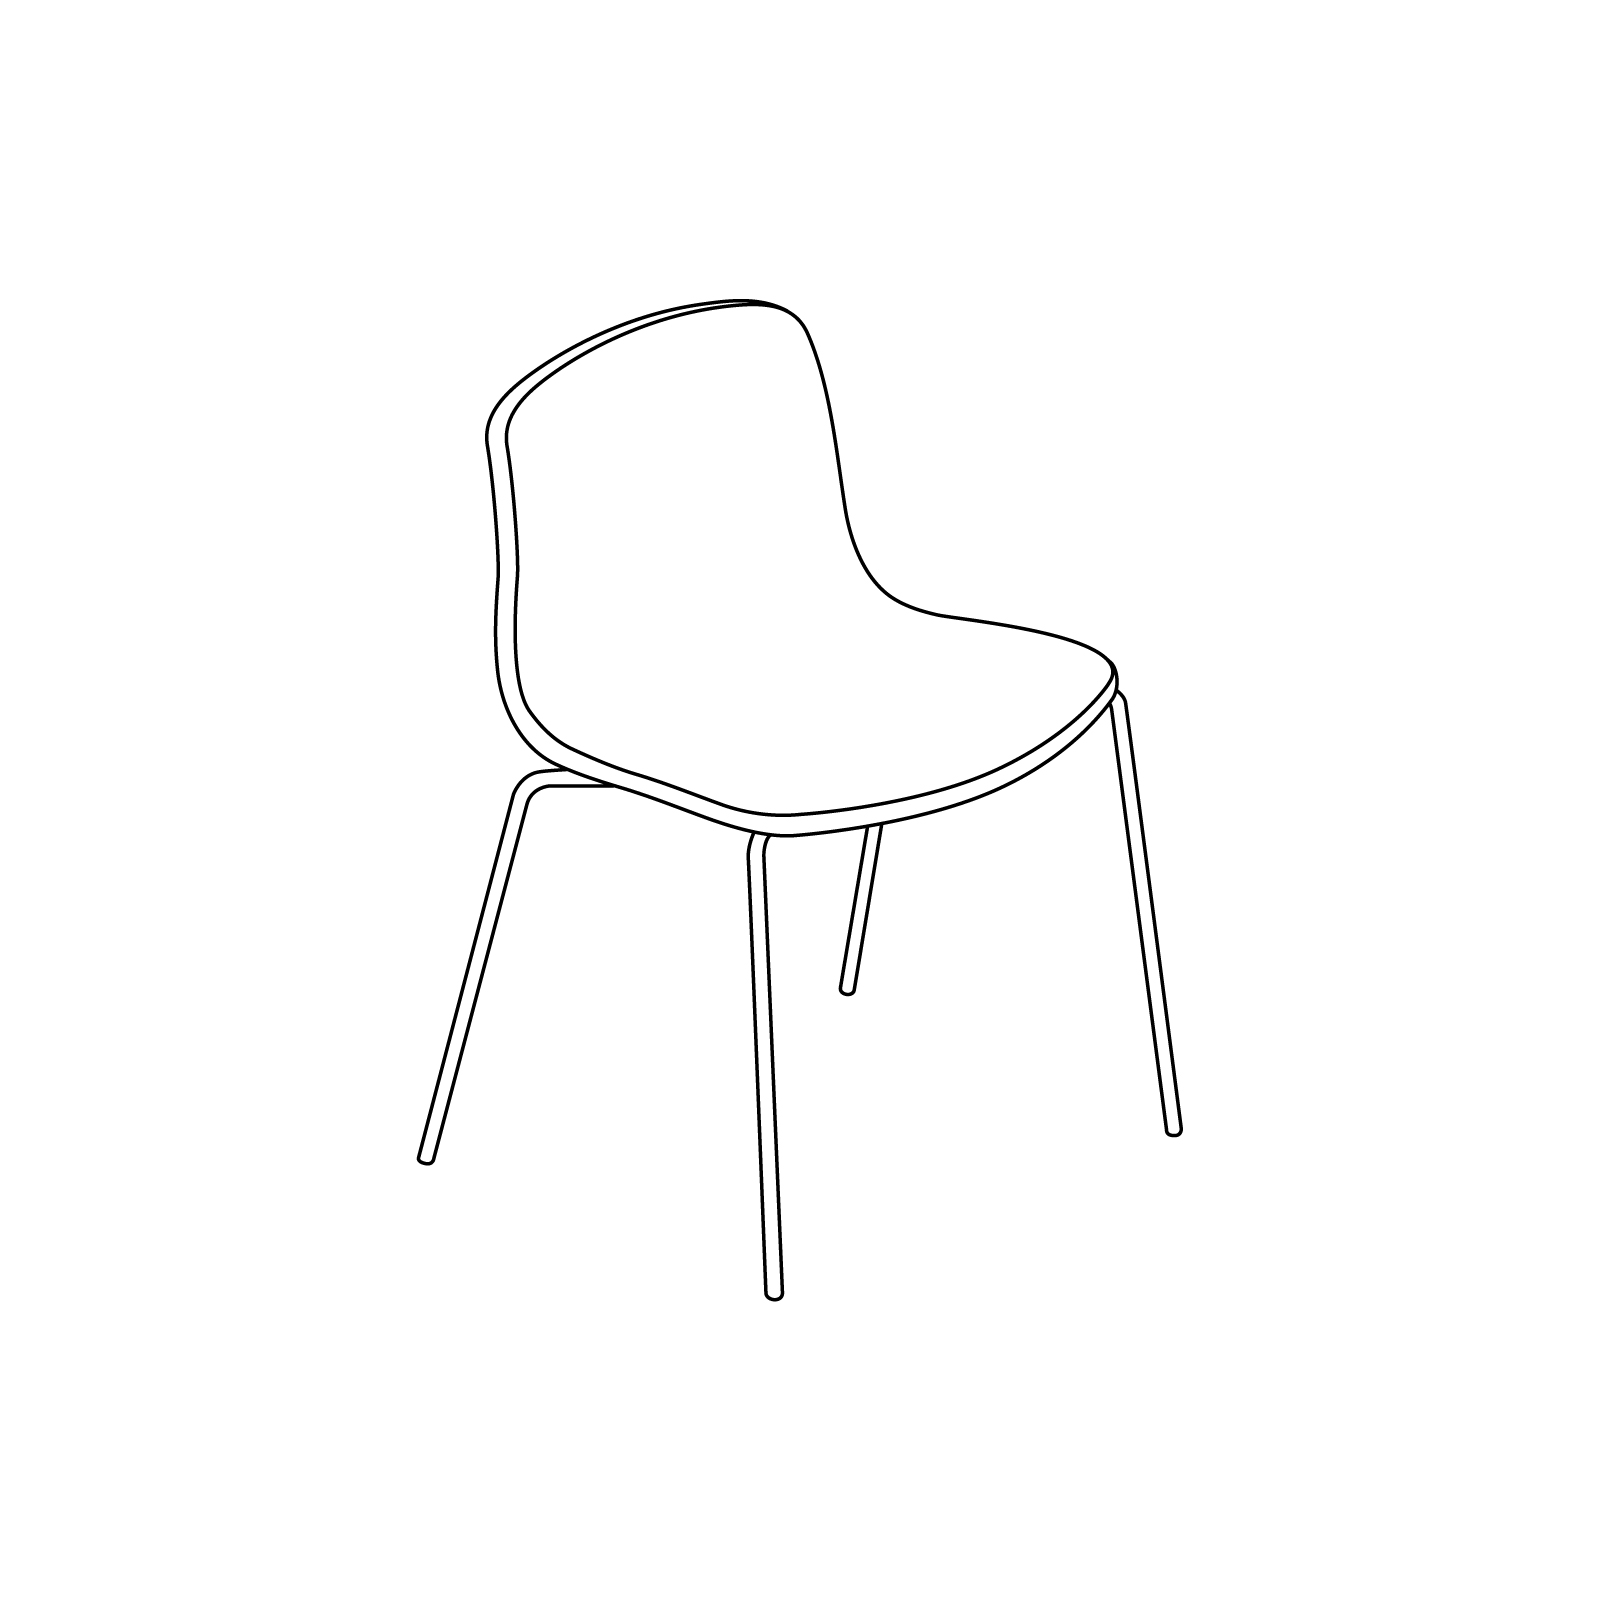 A line drawing - About A Chair–Armless–Metal Stacking Base (AAC16, AAC17)